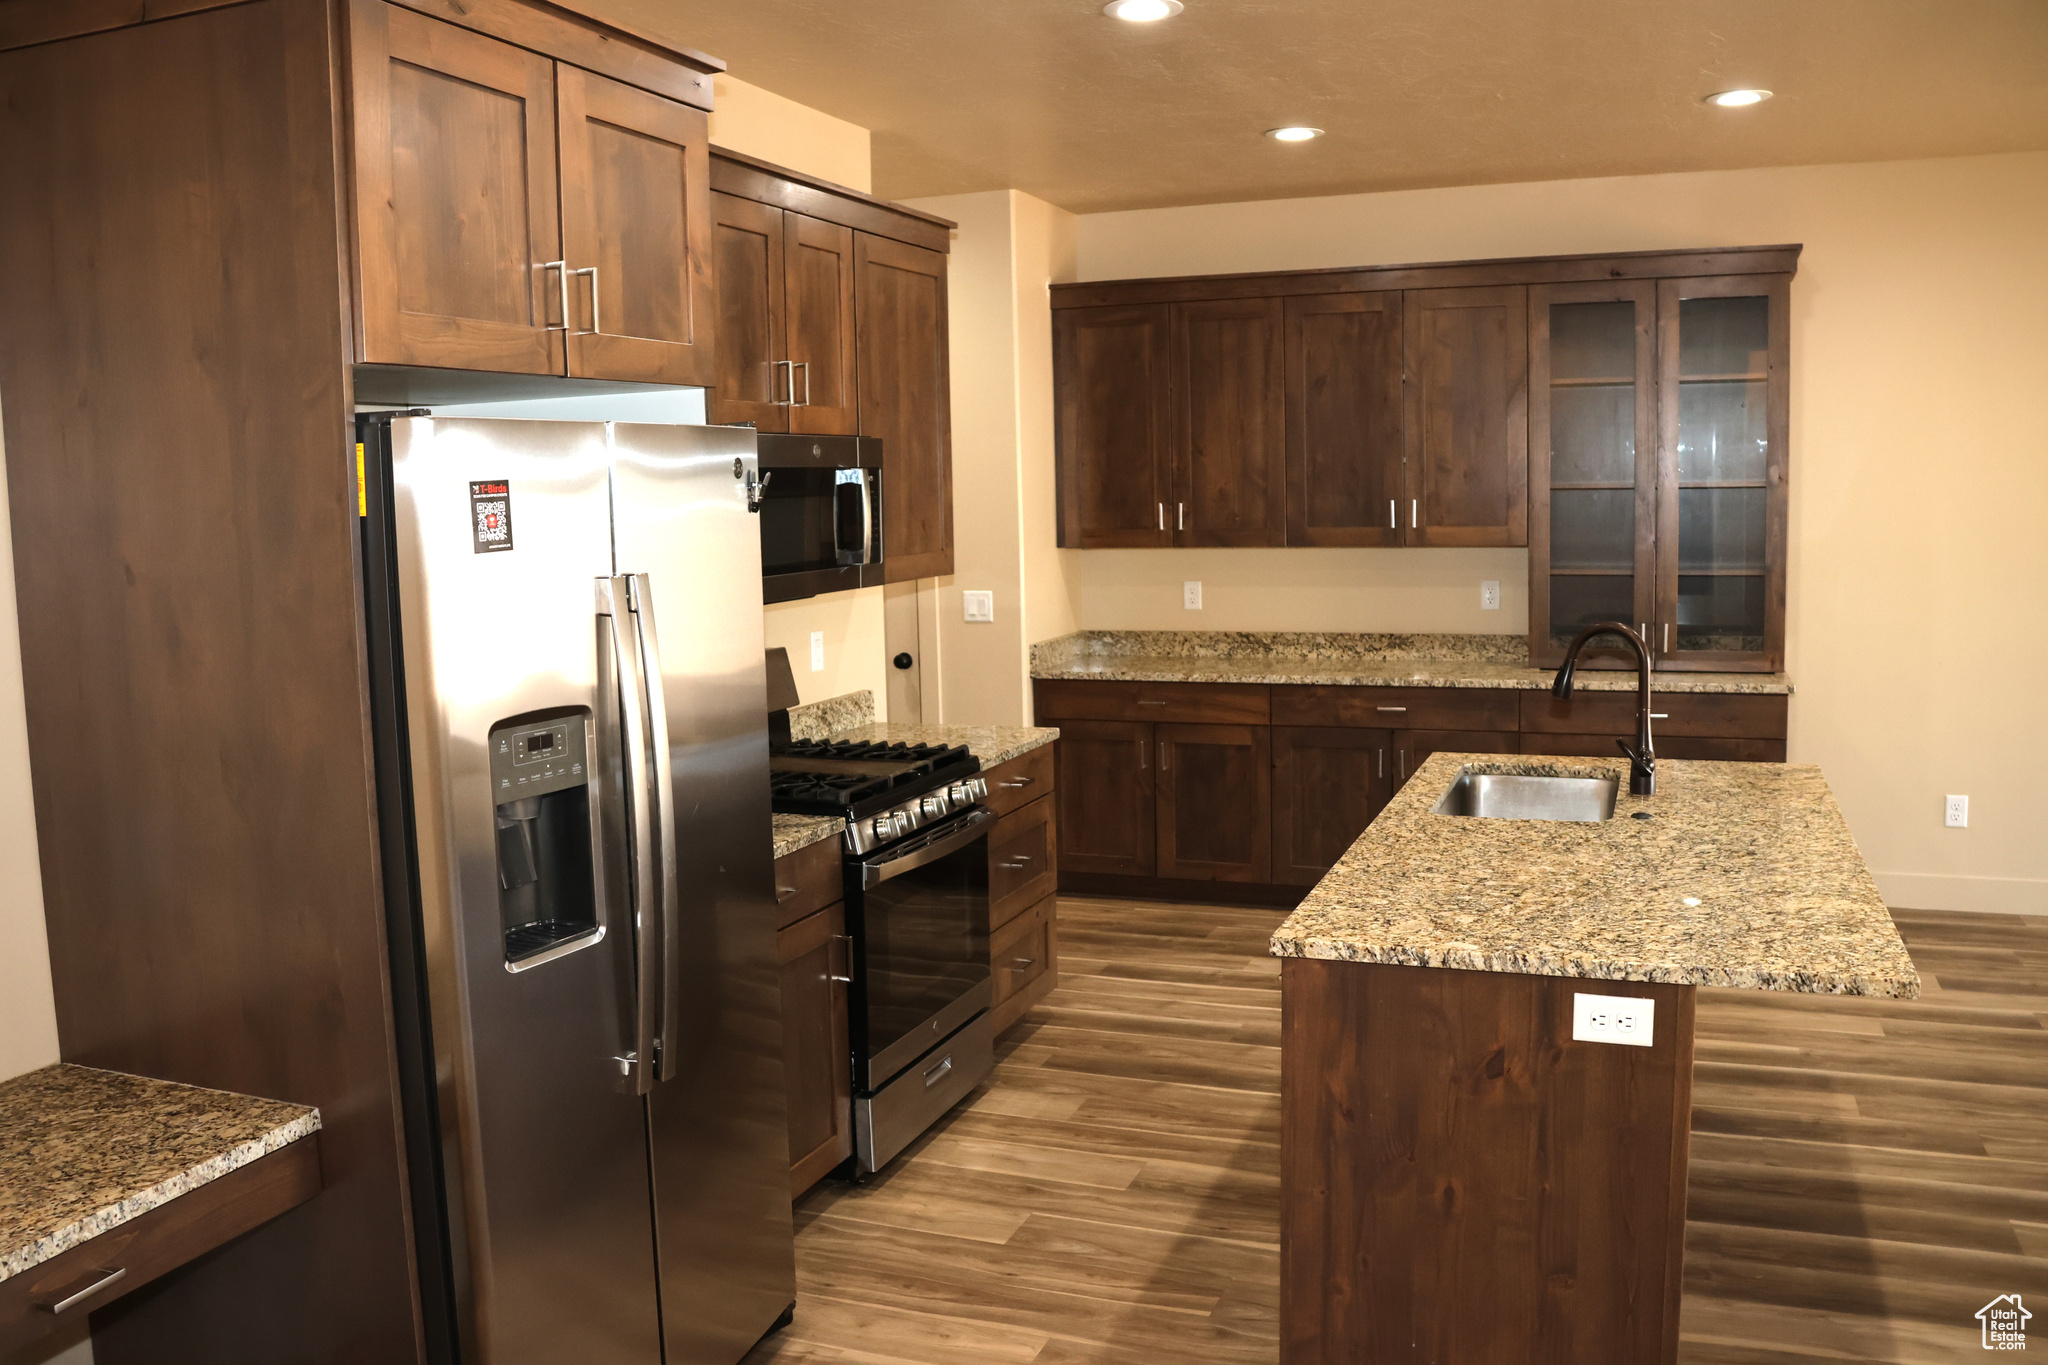 Kitchen with wood-type flooring, light stone countertops, appliances with stainless steel finishes, sink, and an island with sink